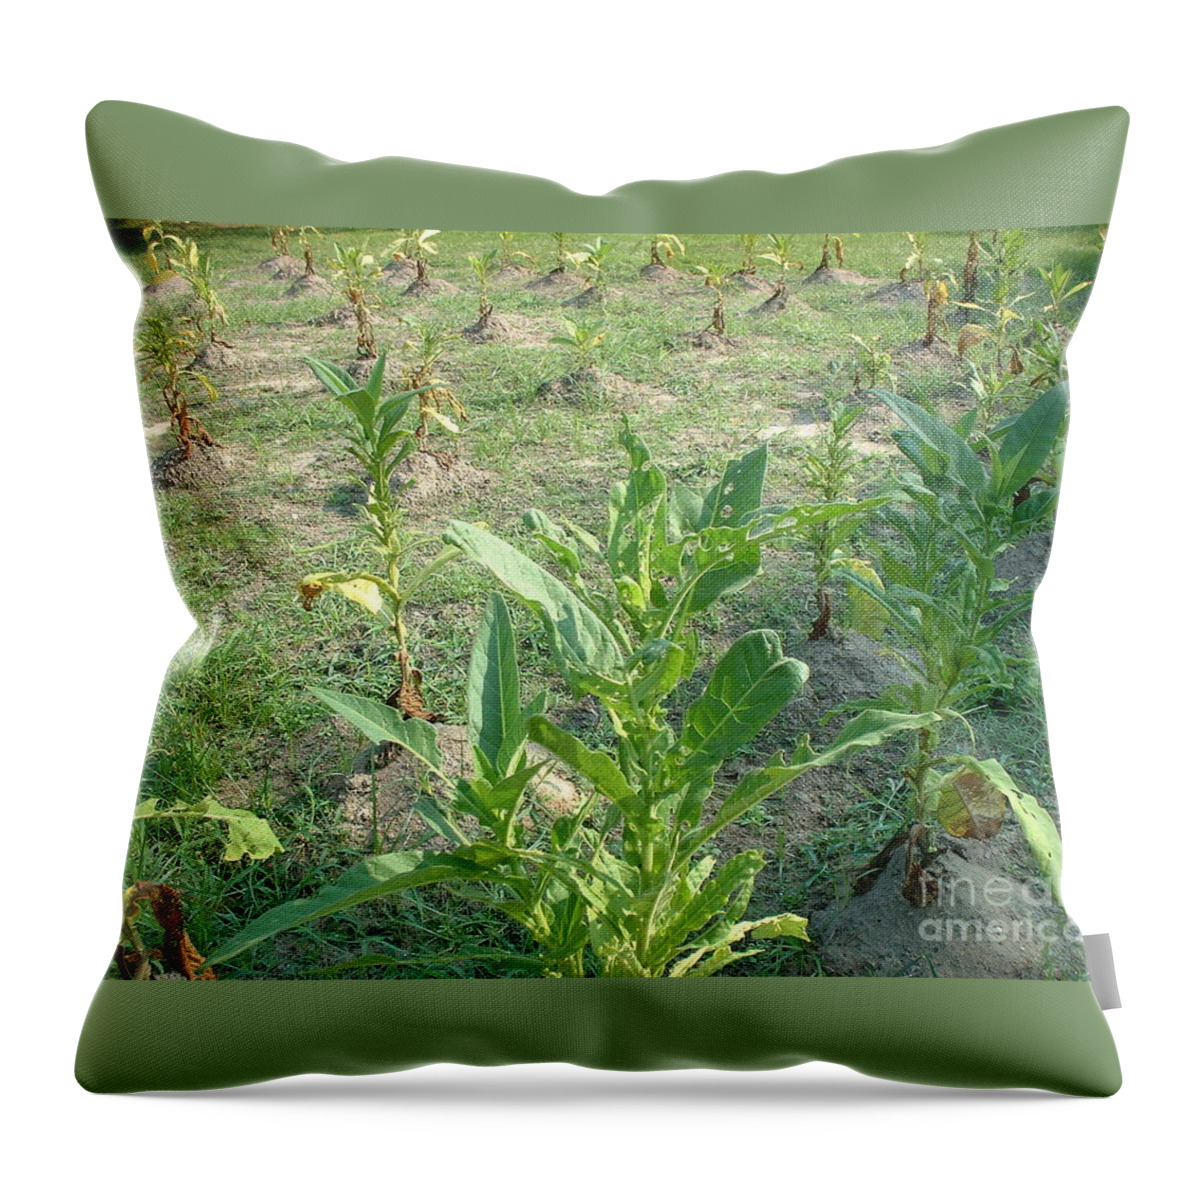 Tobacco Throw Pillow featuring the photograph Tobacco Addiction by Mark Robbins